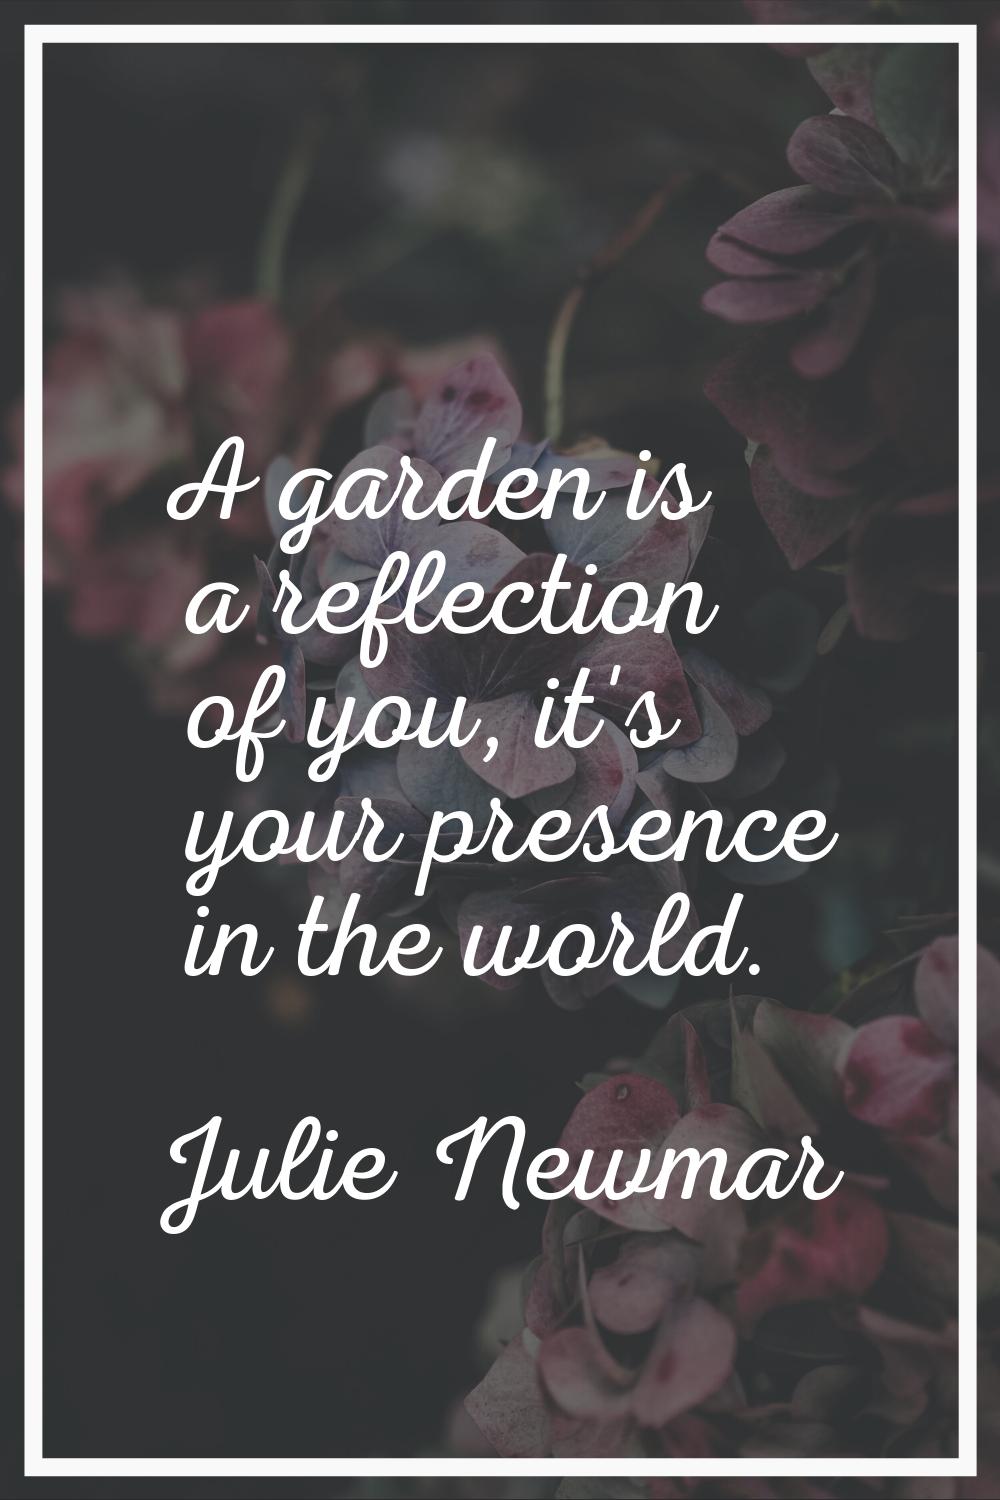 A garden is a reflection of you, it's your presence in the world.